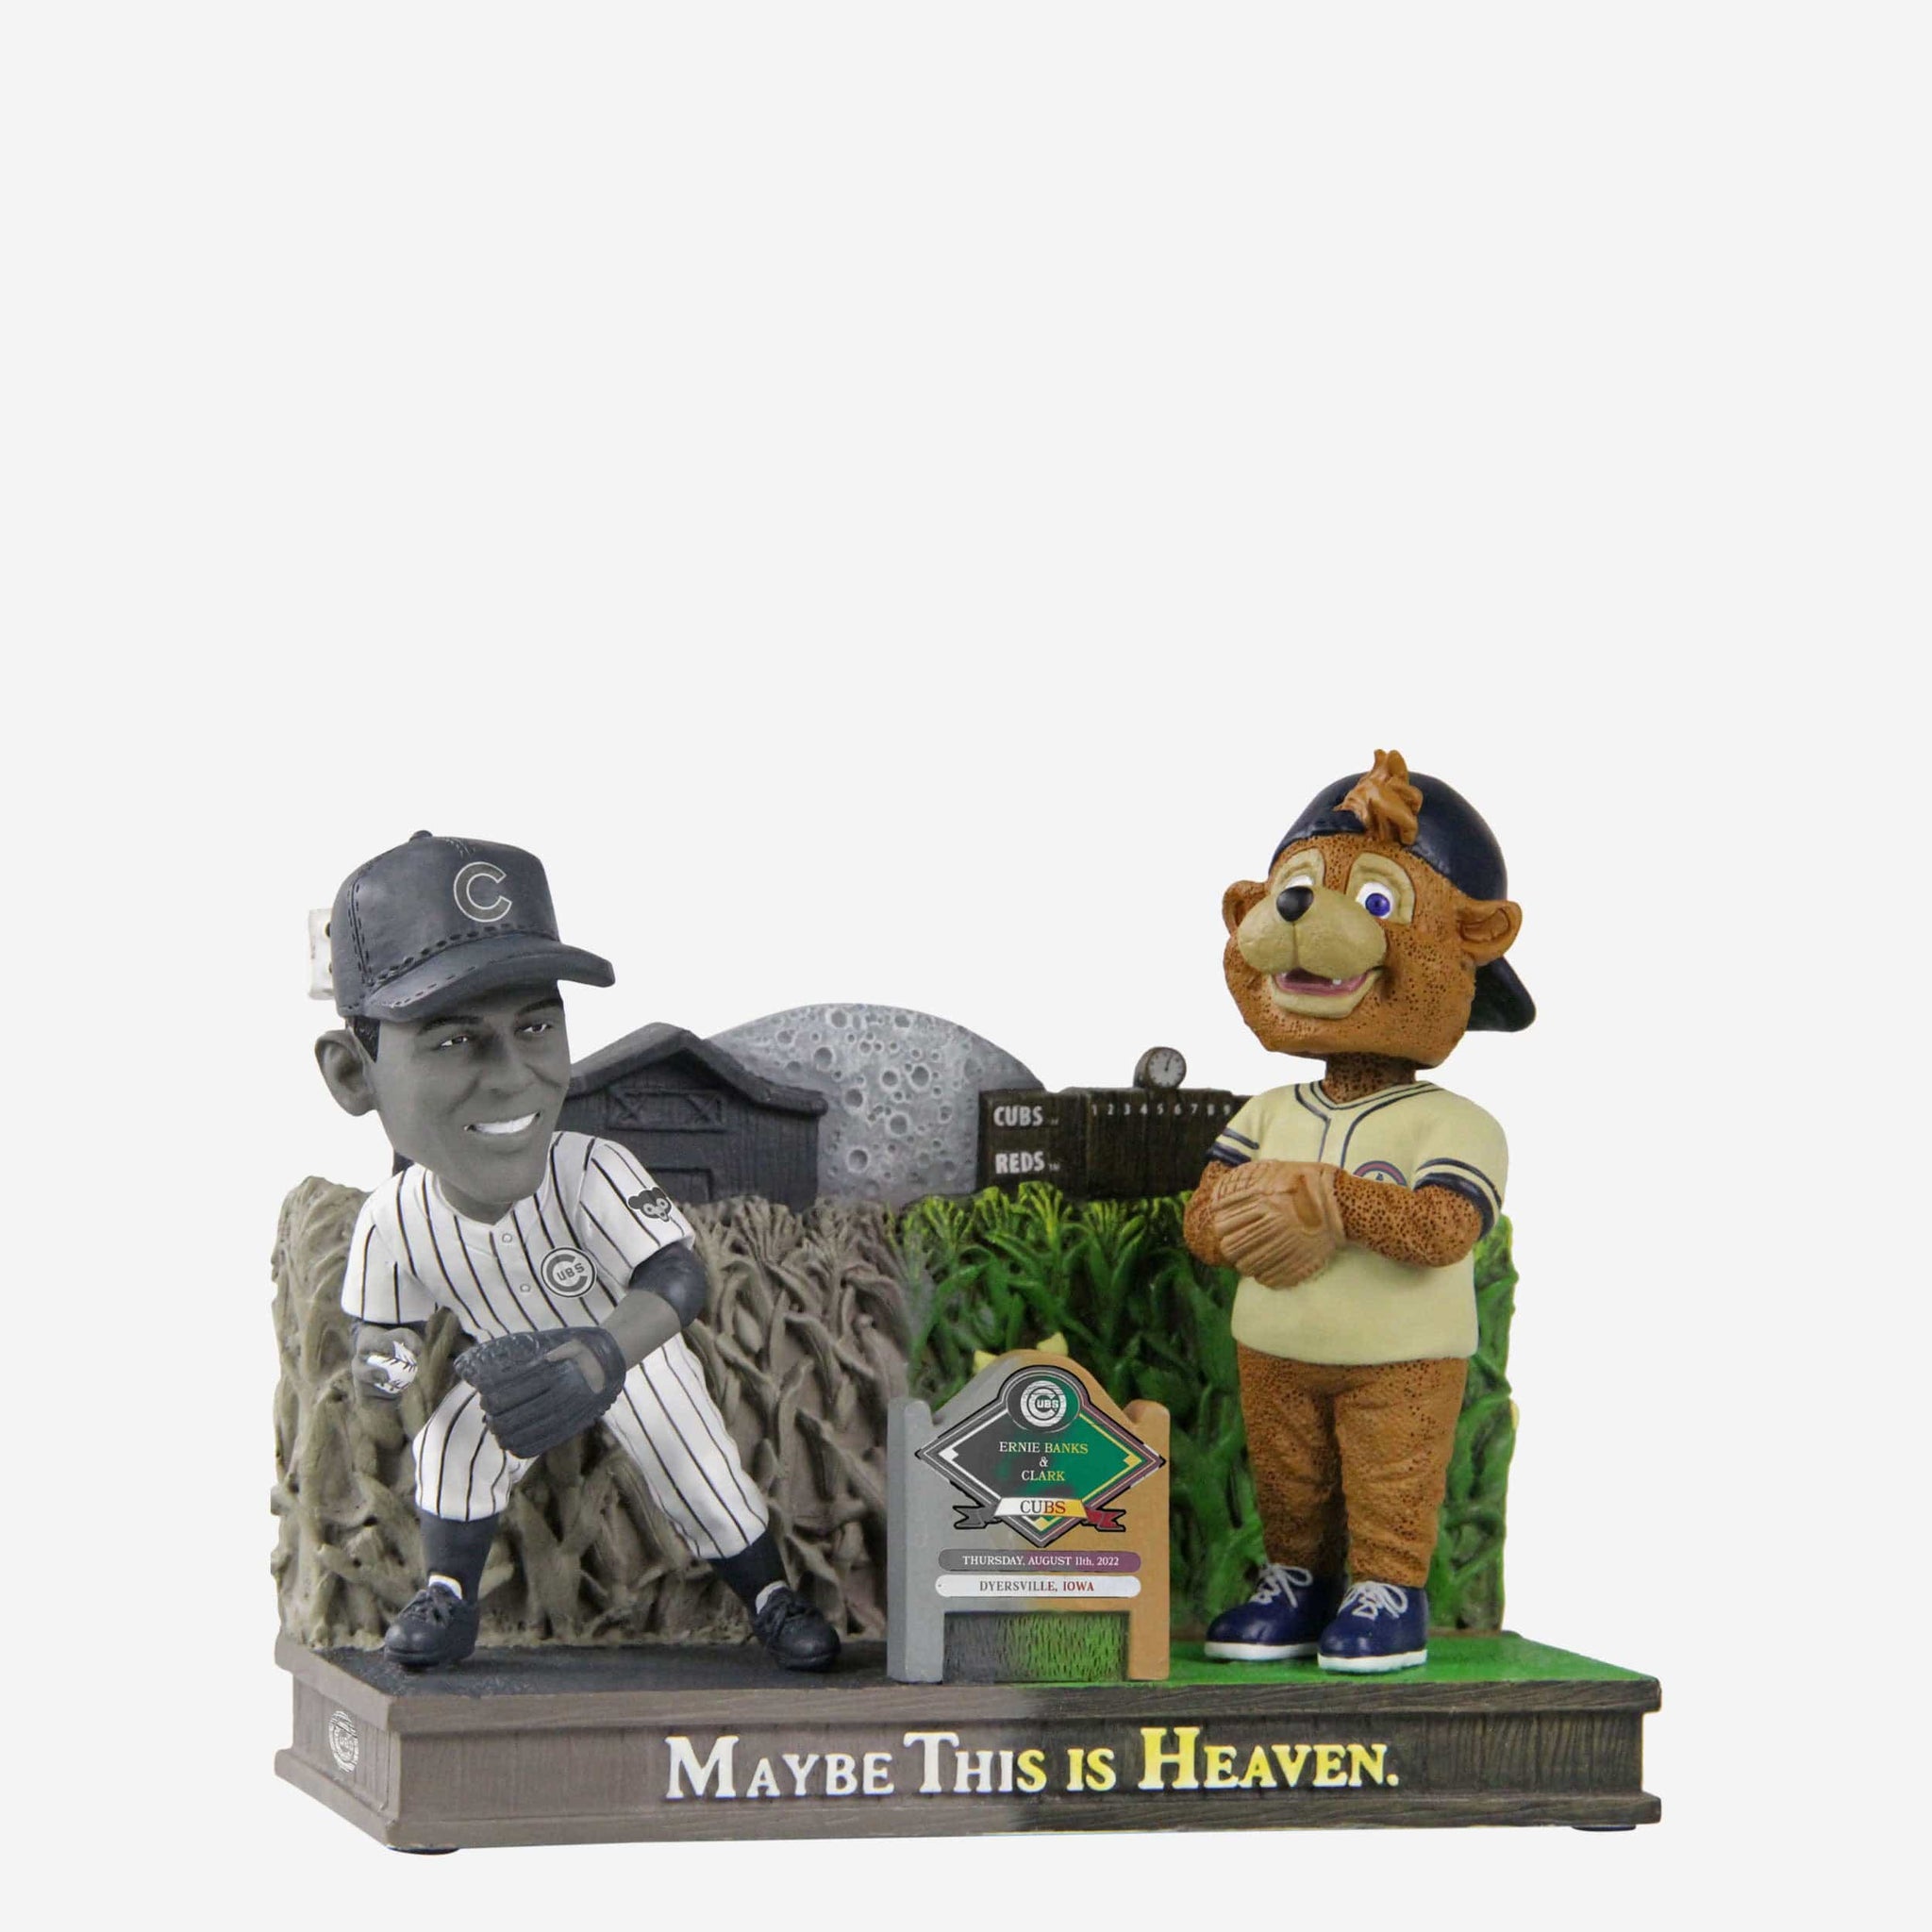 Check out these Chicago Cubs Field of Dreams Game bobbleheads